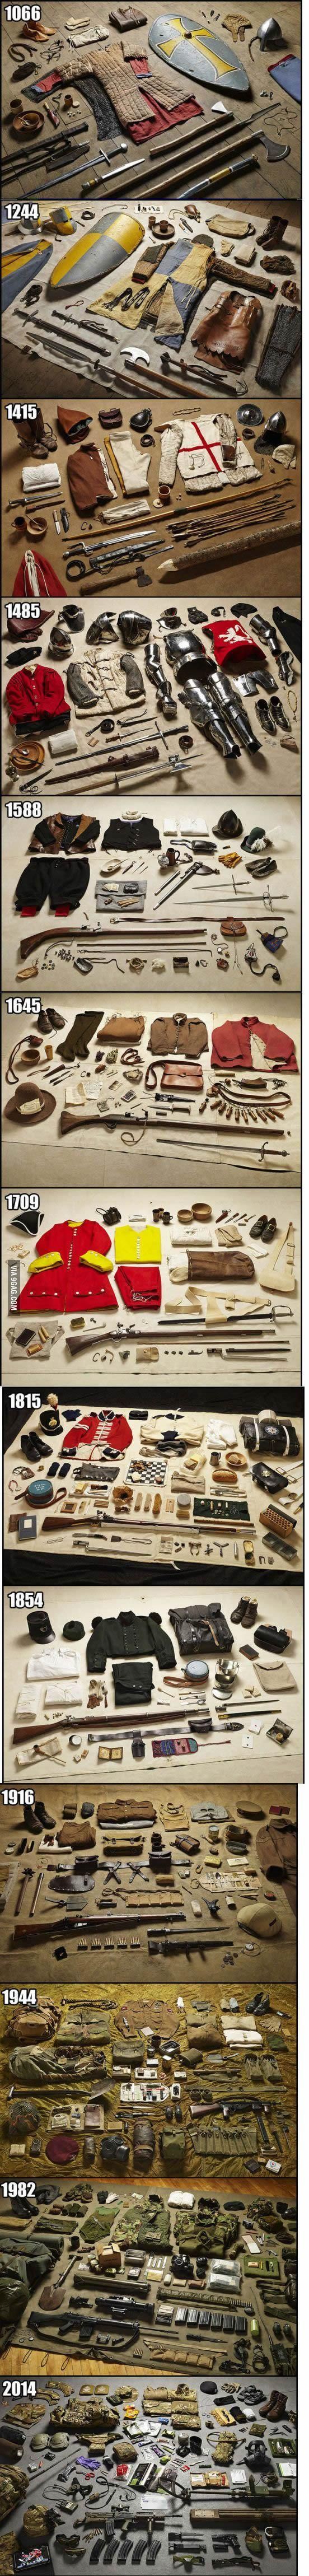 History of war uniforms in one image.